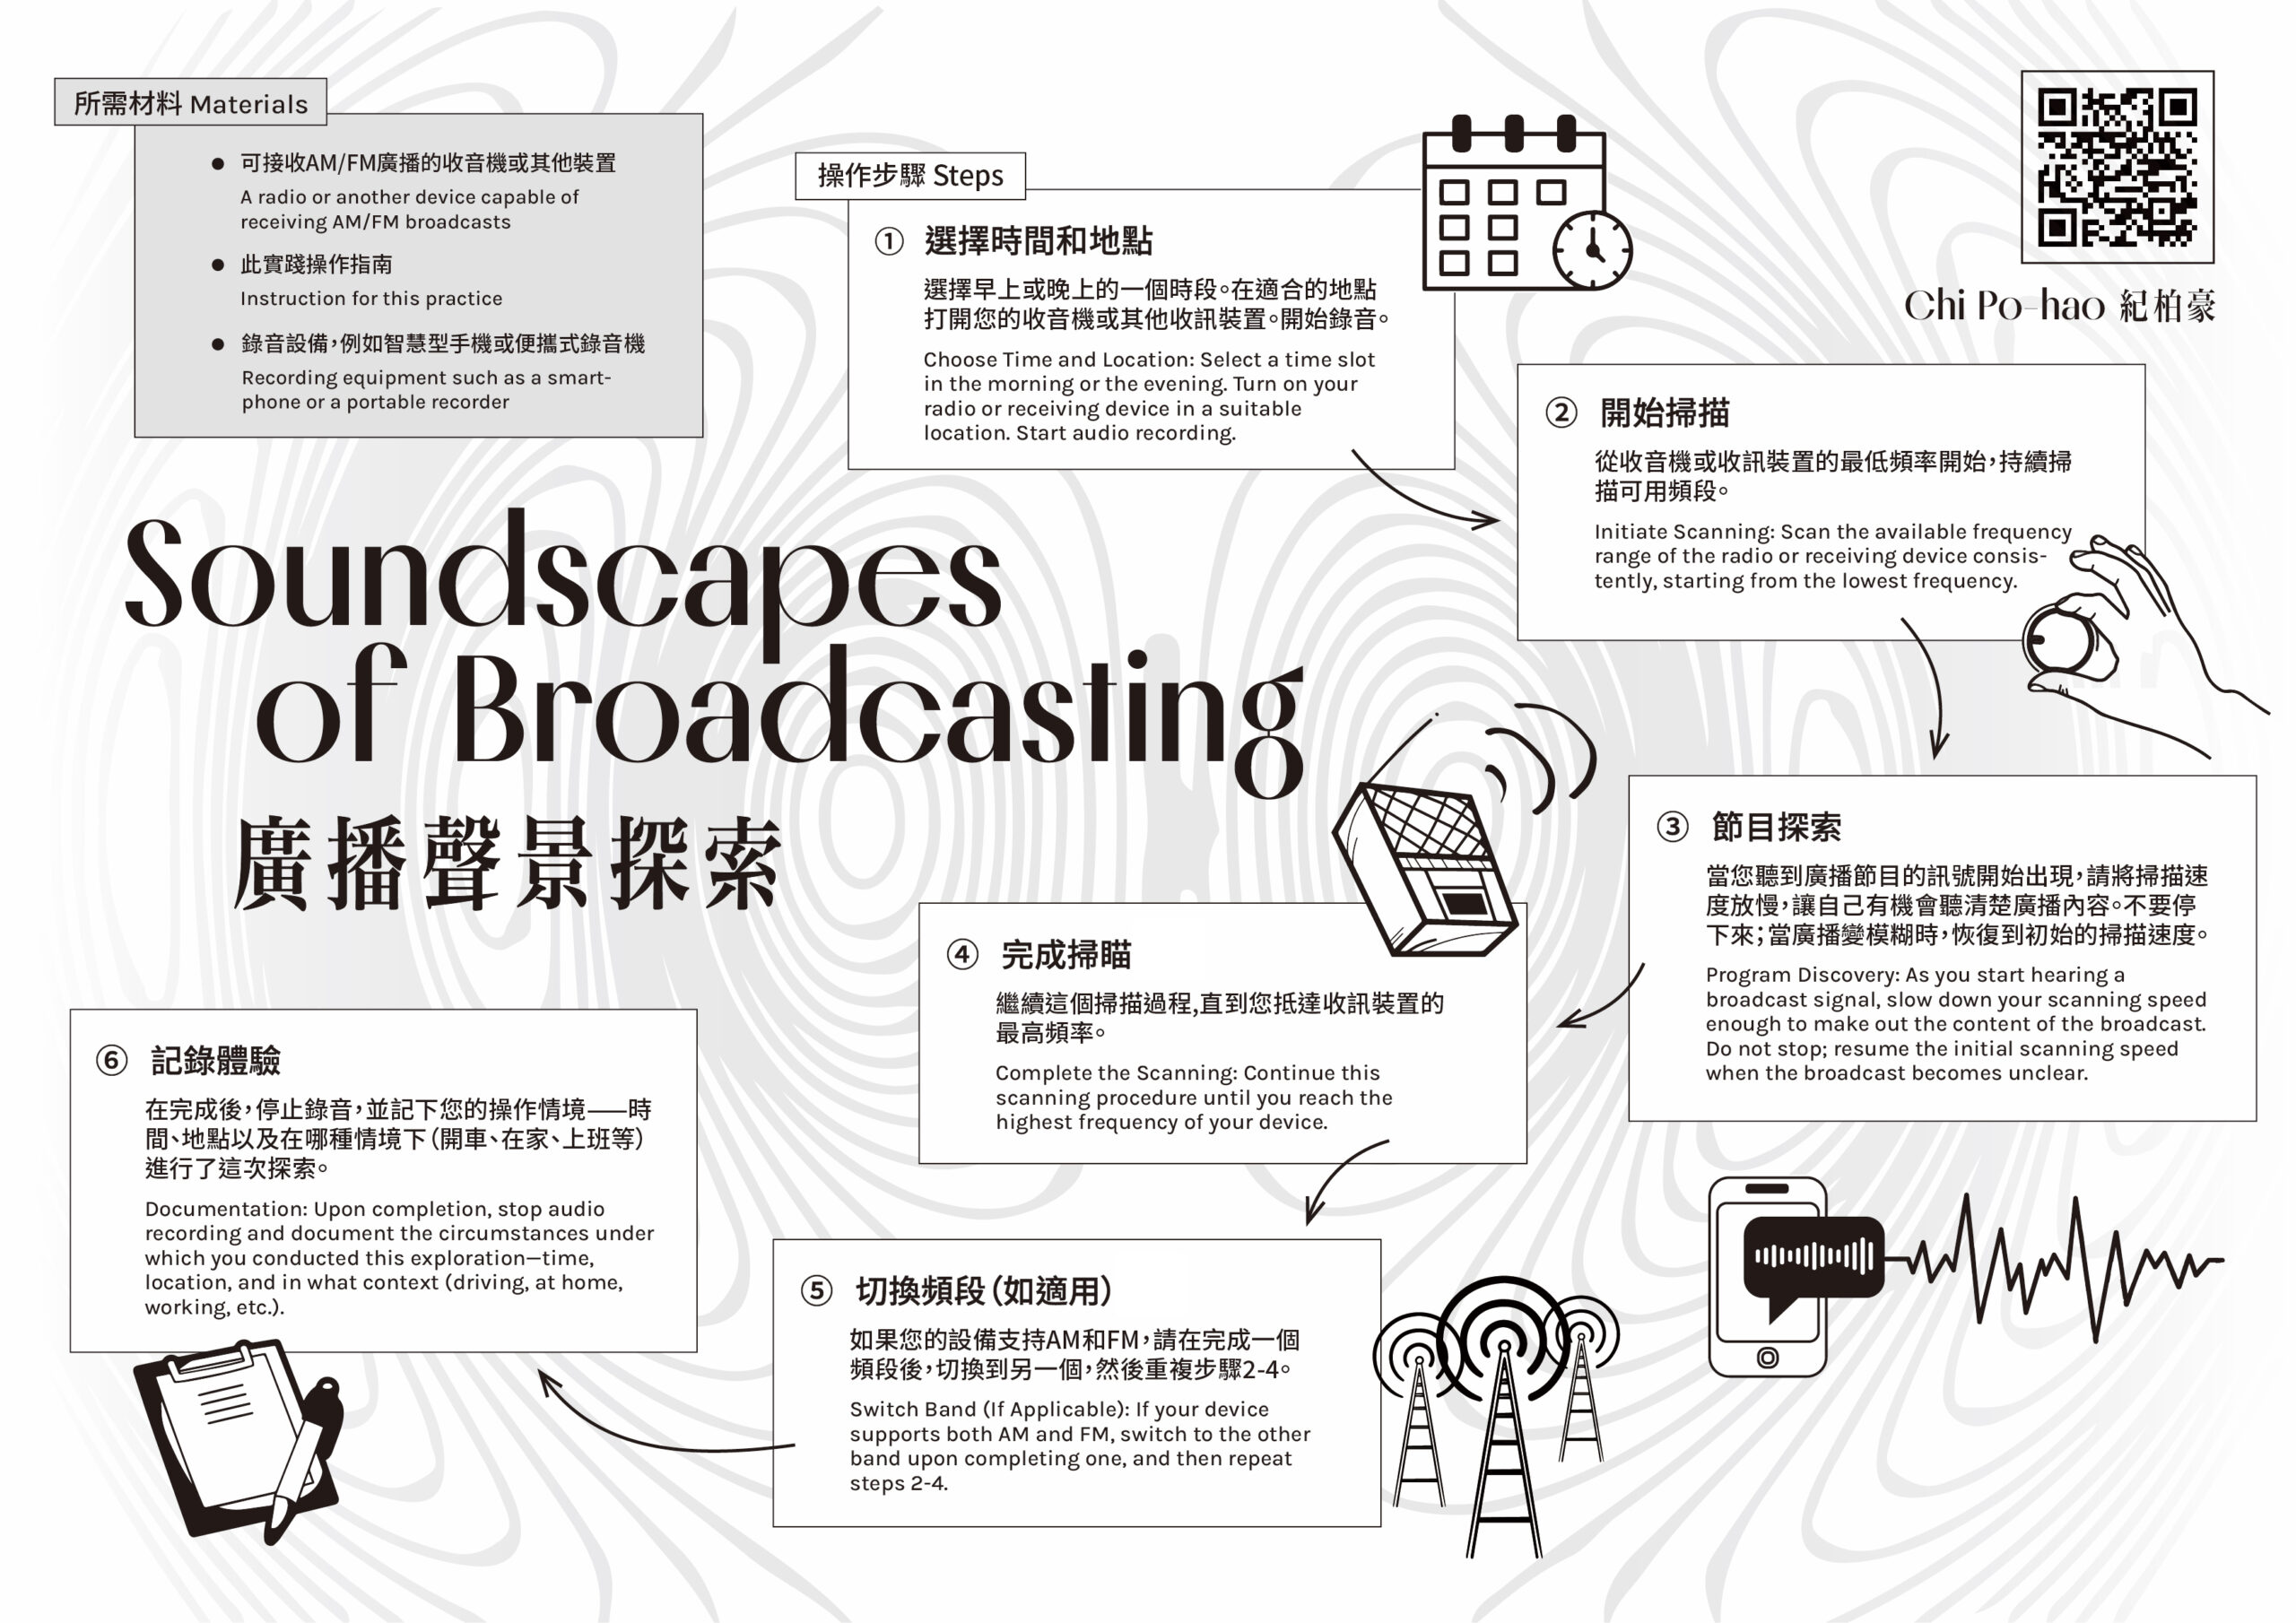 Soundscapes of Broadcasting